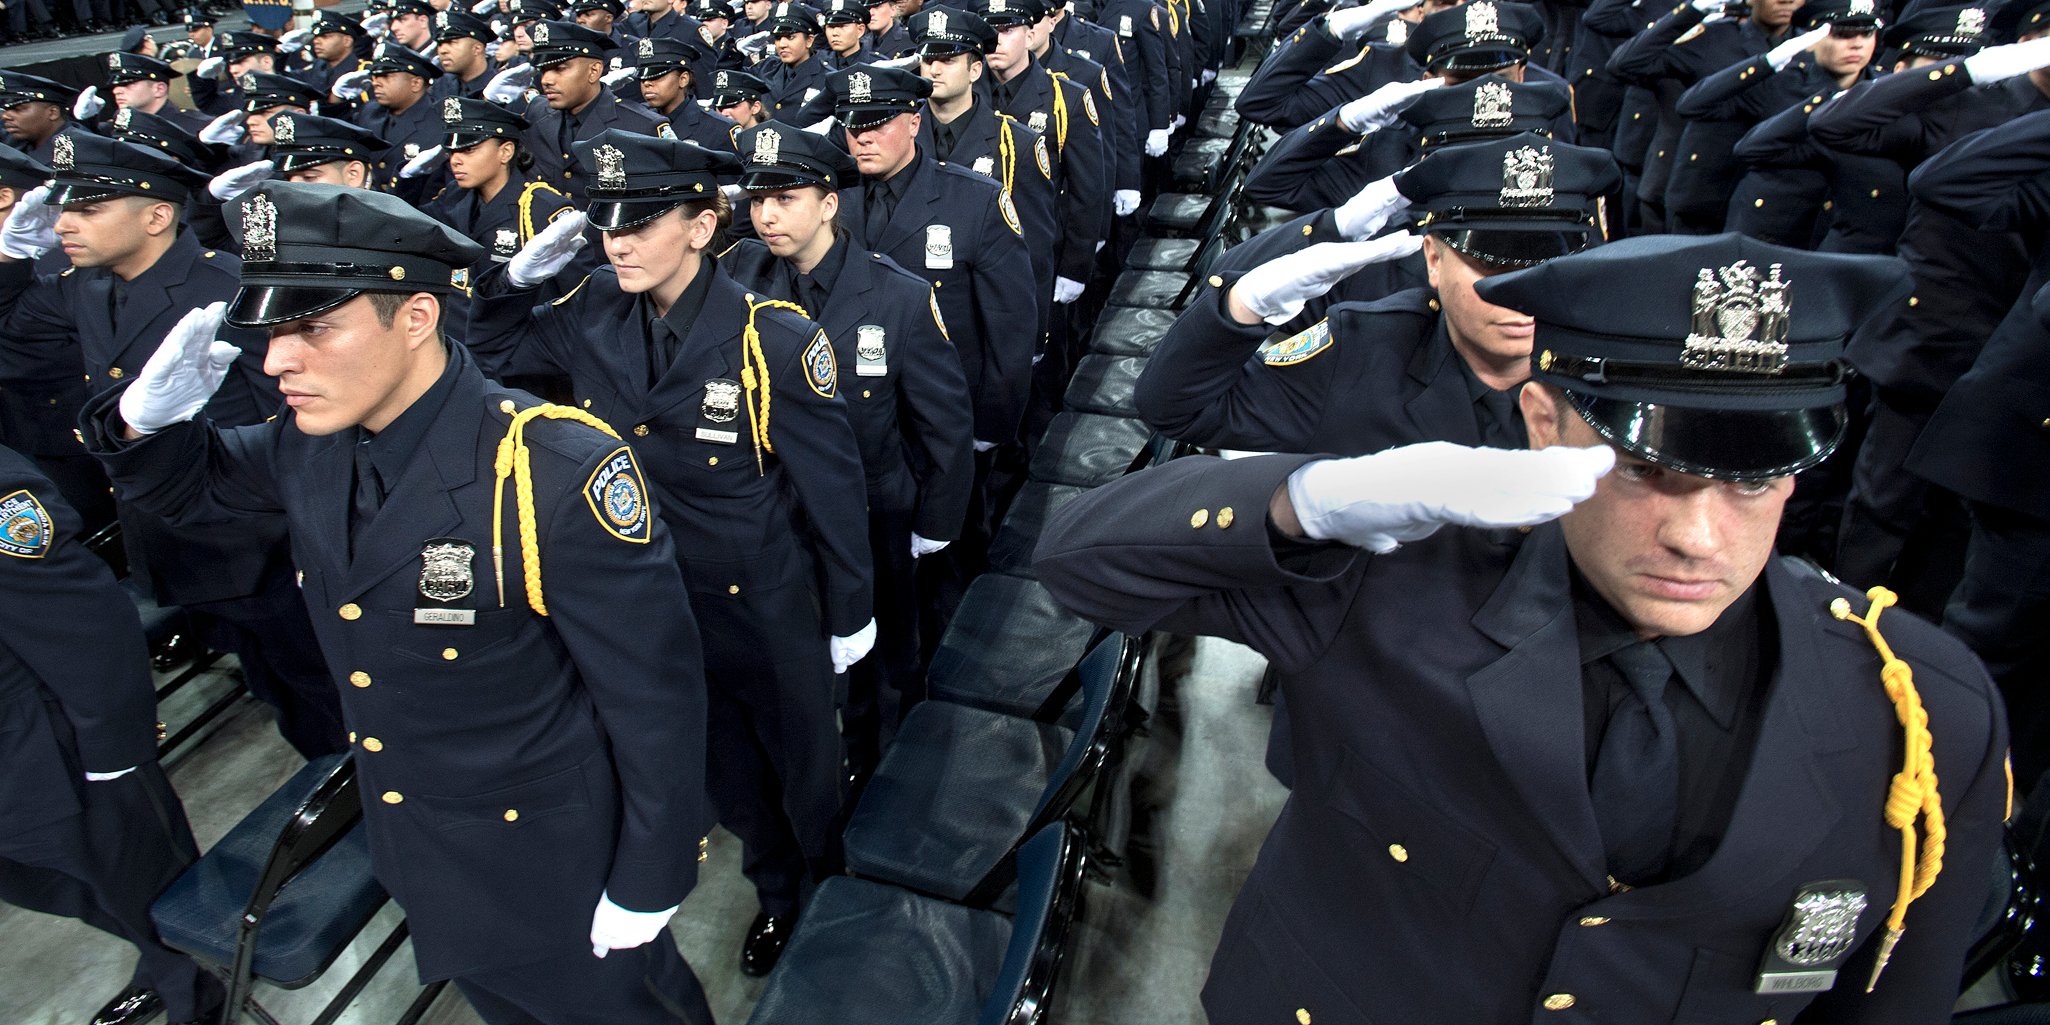 American Police Reform Requires a National Registry of Police ...